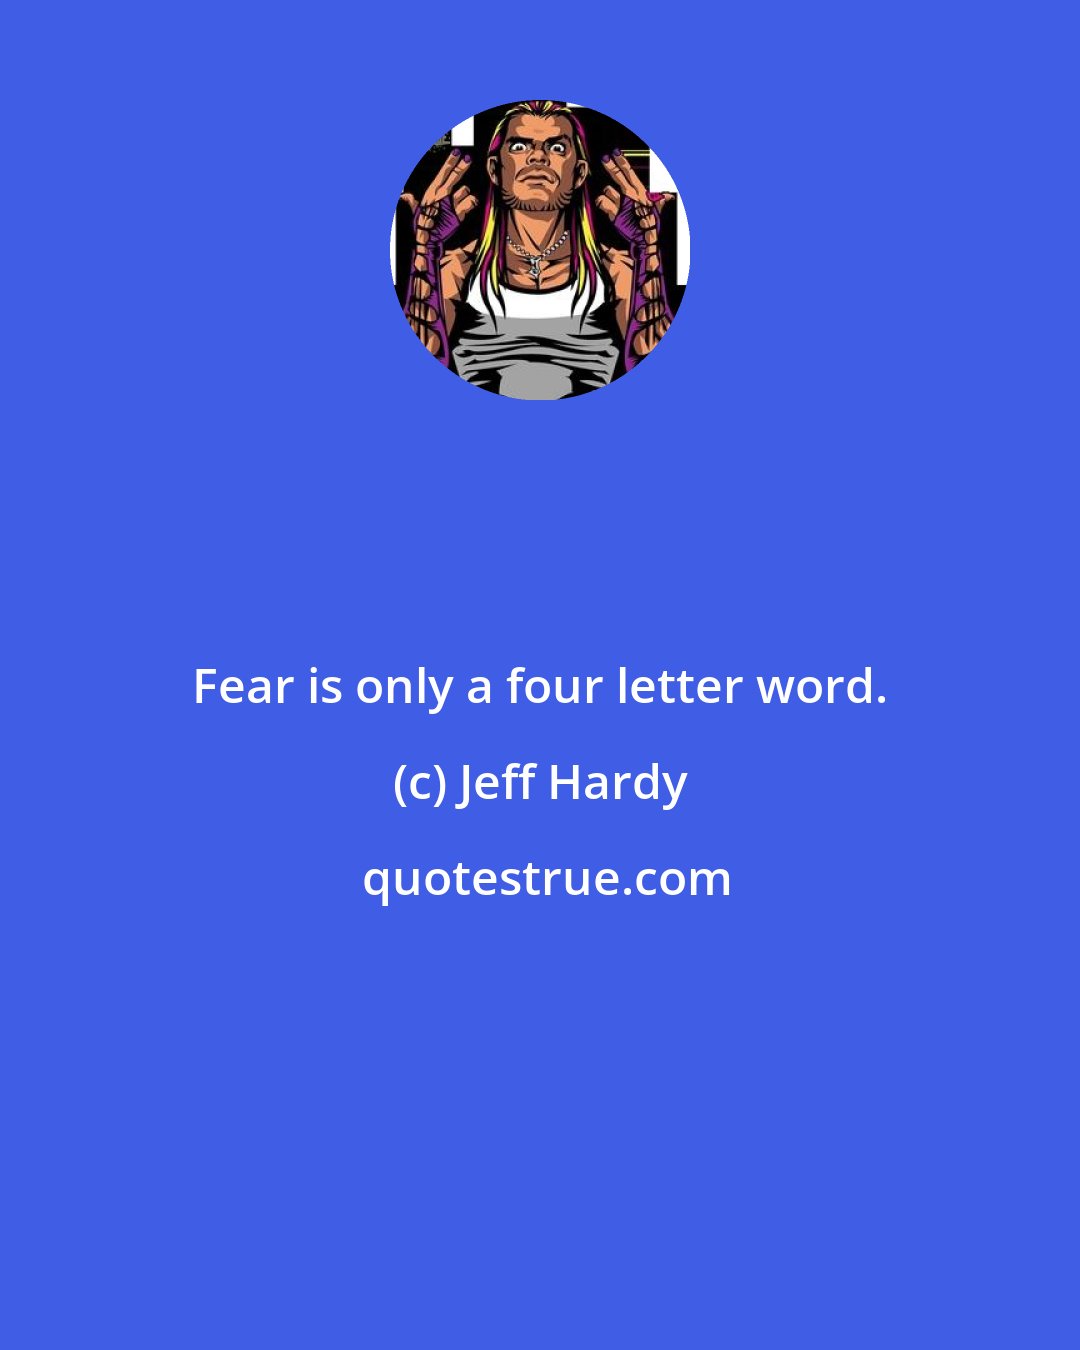 Jeff Hardy: Fear is only a four letter word.